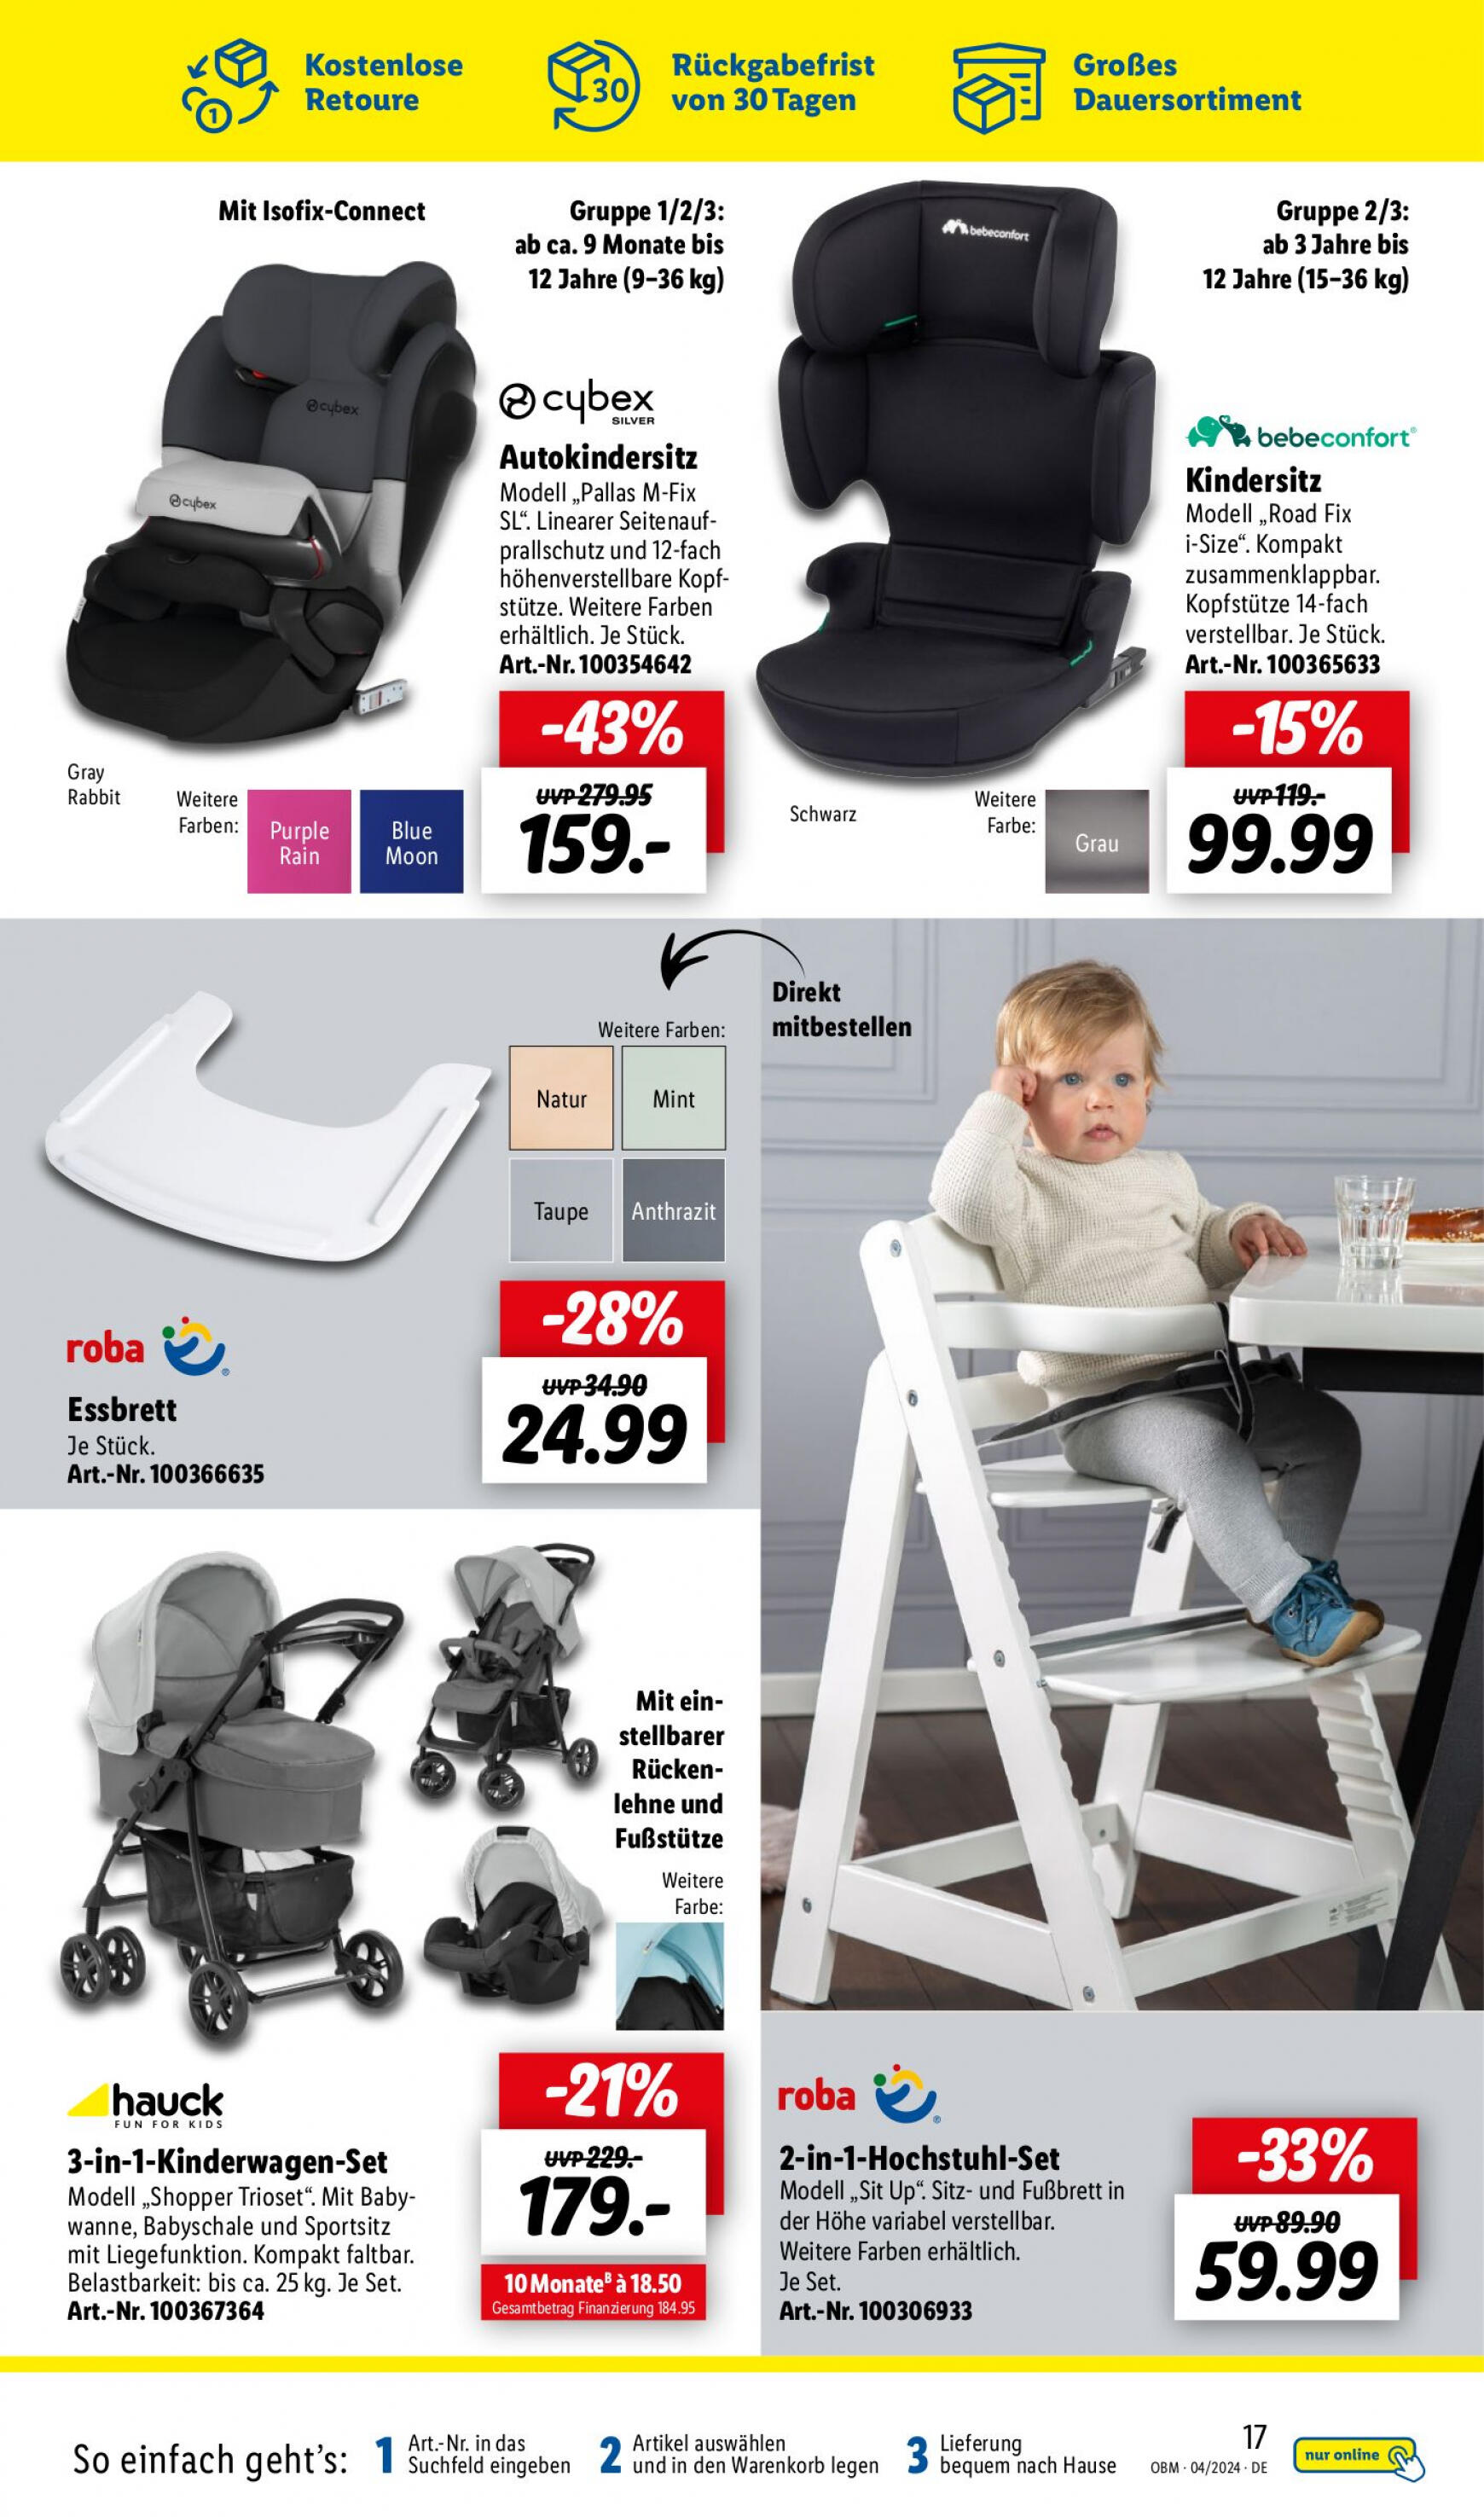 lidl - Flyer Lidl - Aktuelle Onlineshop-Highlights aktuell 01.04. - 30.04. - page: 17